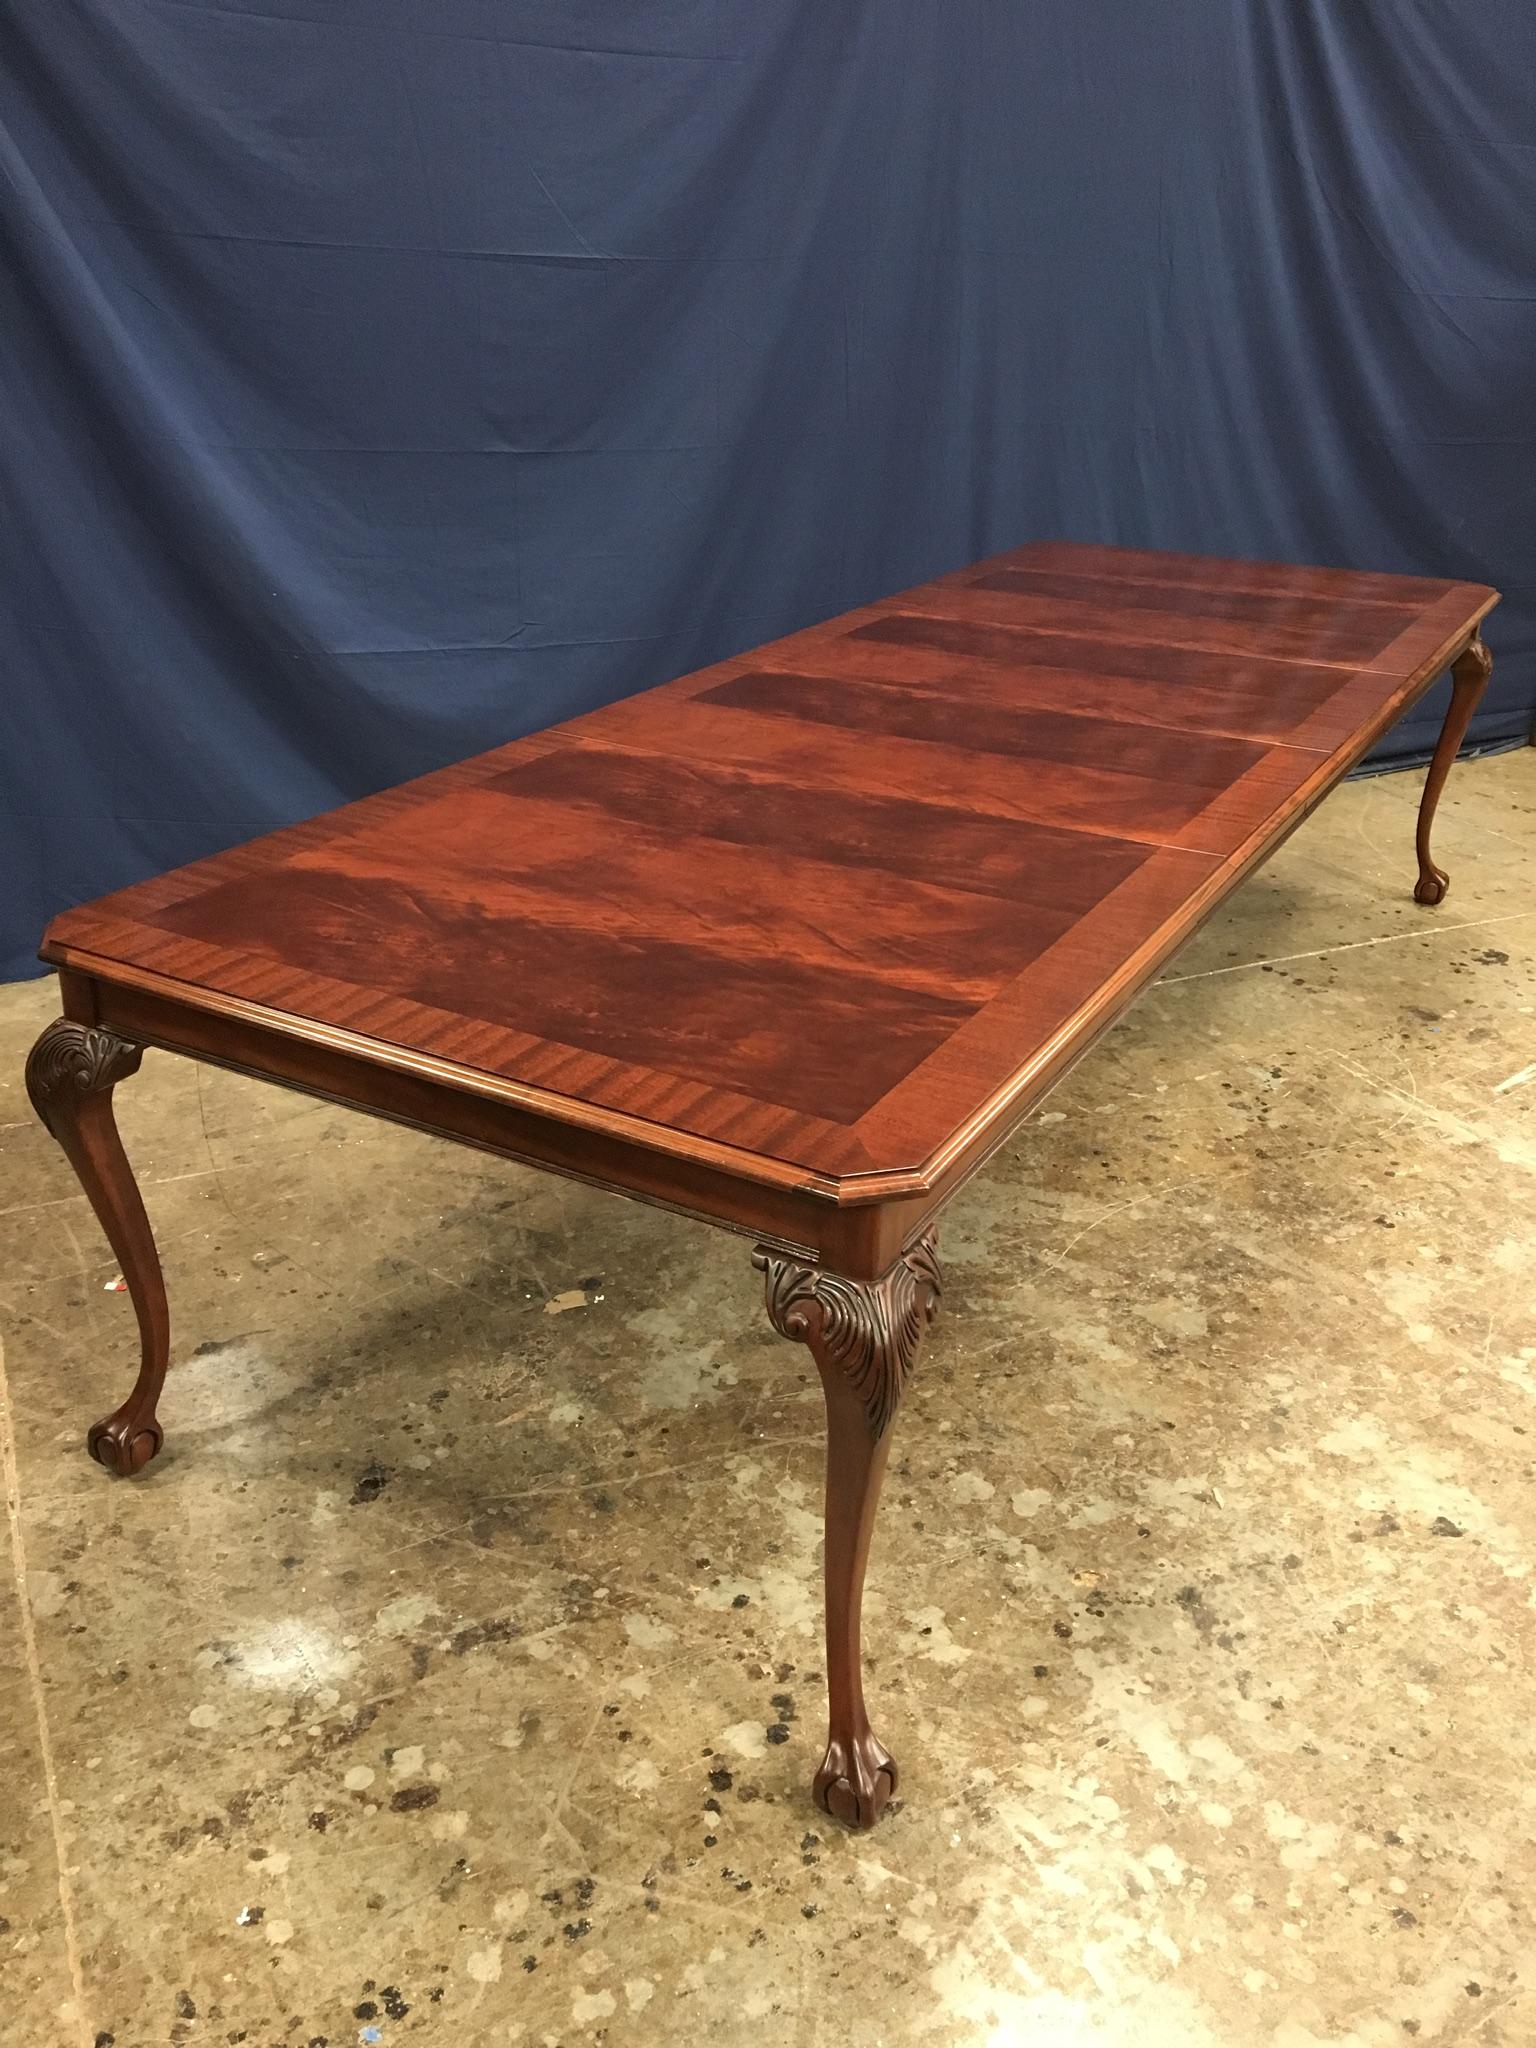 This is a made-to-order traditional Chippendale style ball and claw foot mahogany dining table made in the Leighton Hall shop. It features a field of reverse-slip-matched swirly crotch mahogany from West Africa and a straight grain mahogany border.